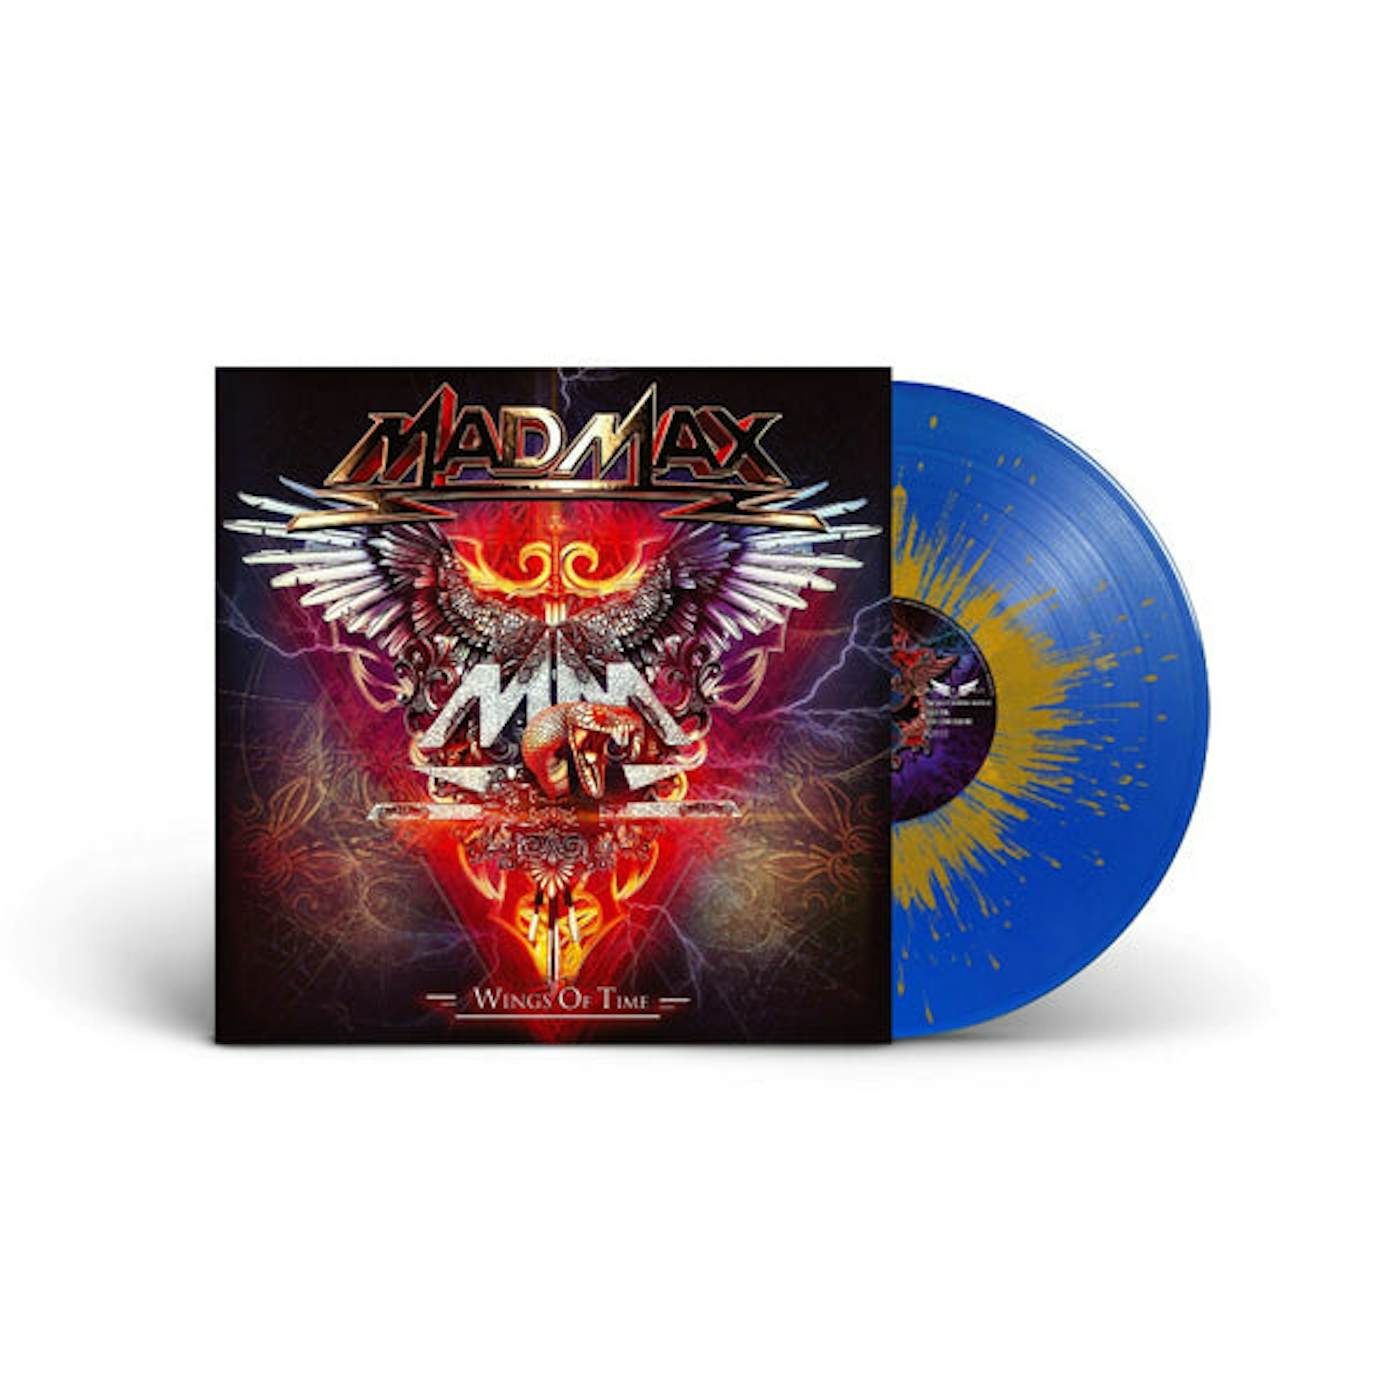 Mad Max LP - Wings Of Time (Blue/Gold Lp) (Vinyl)